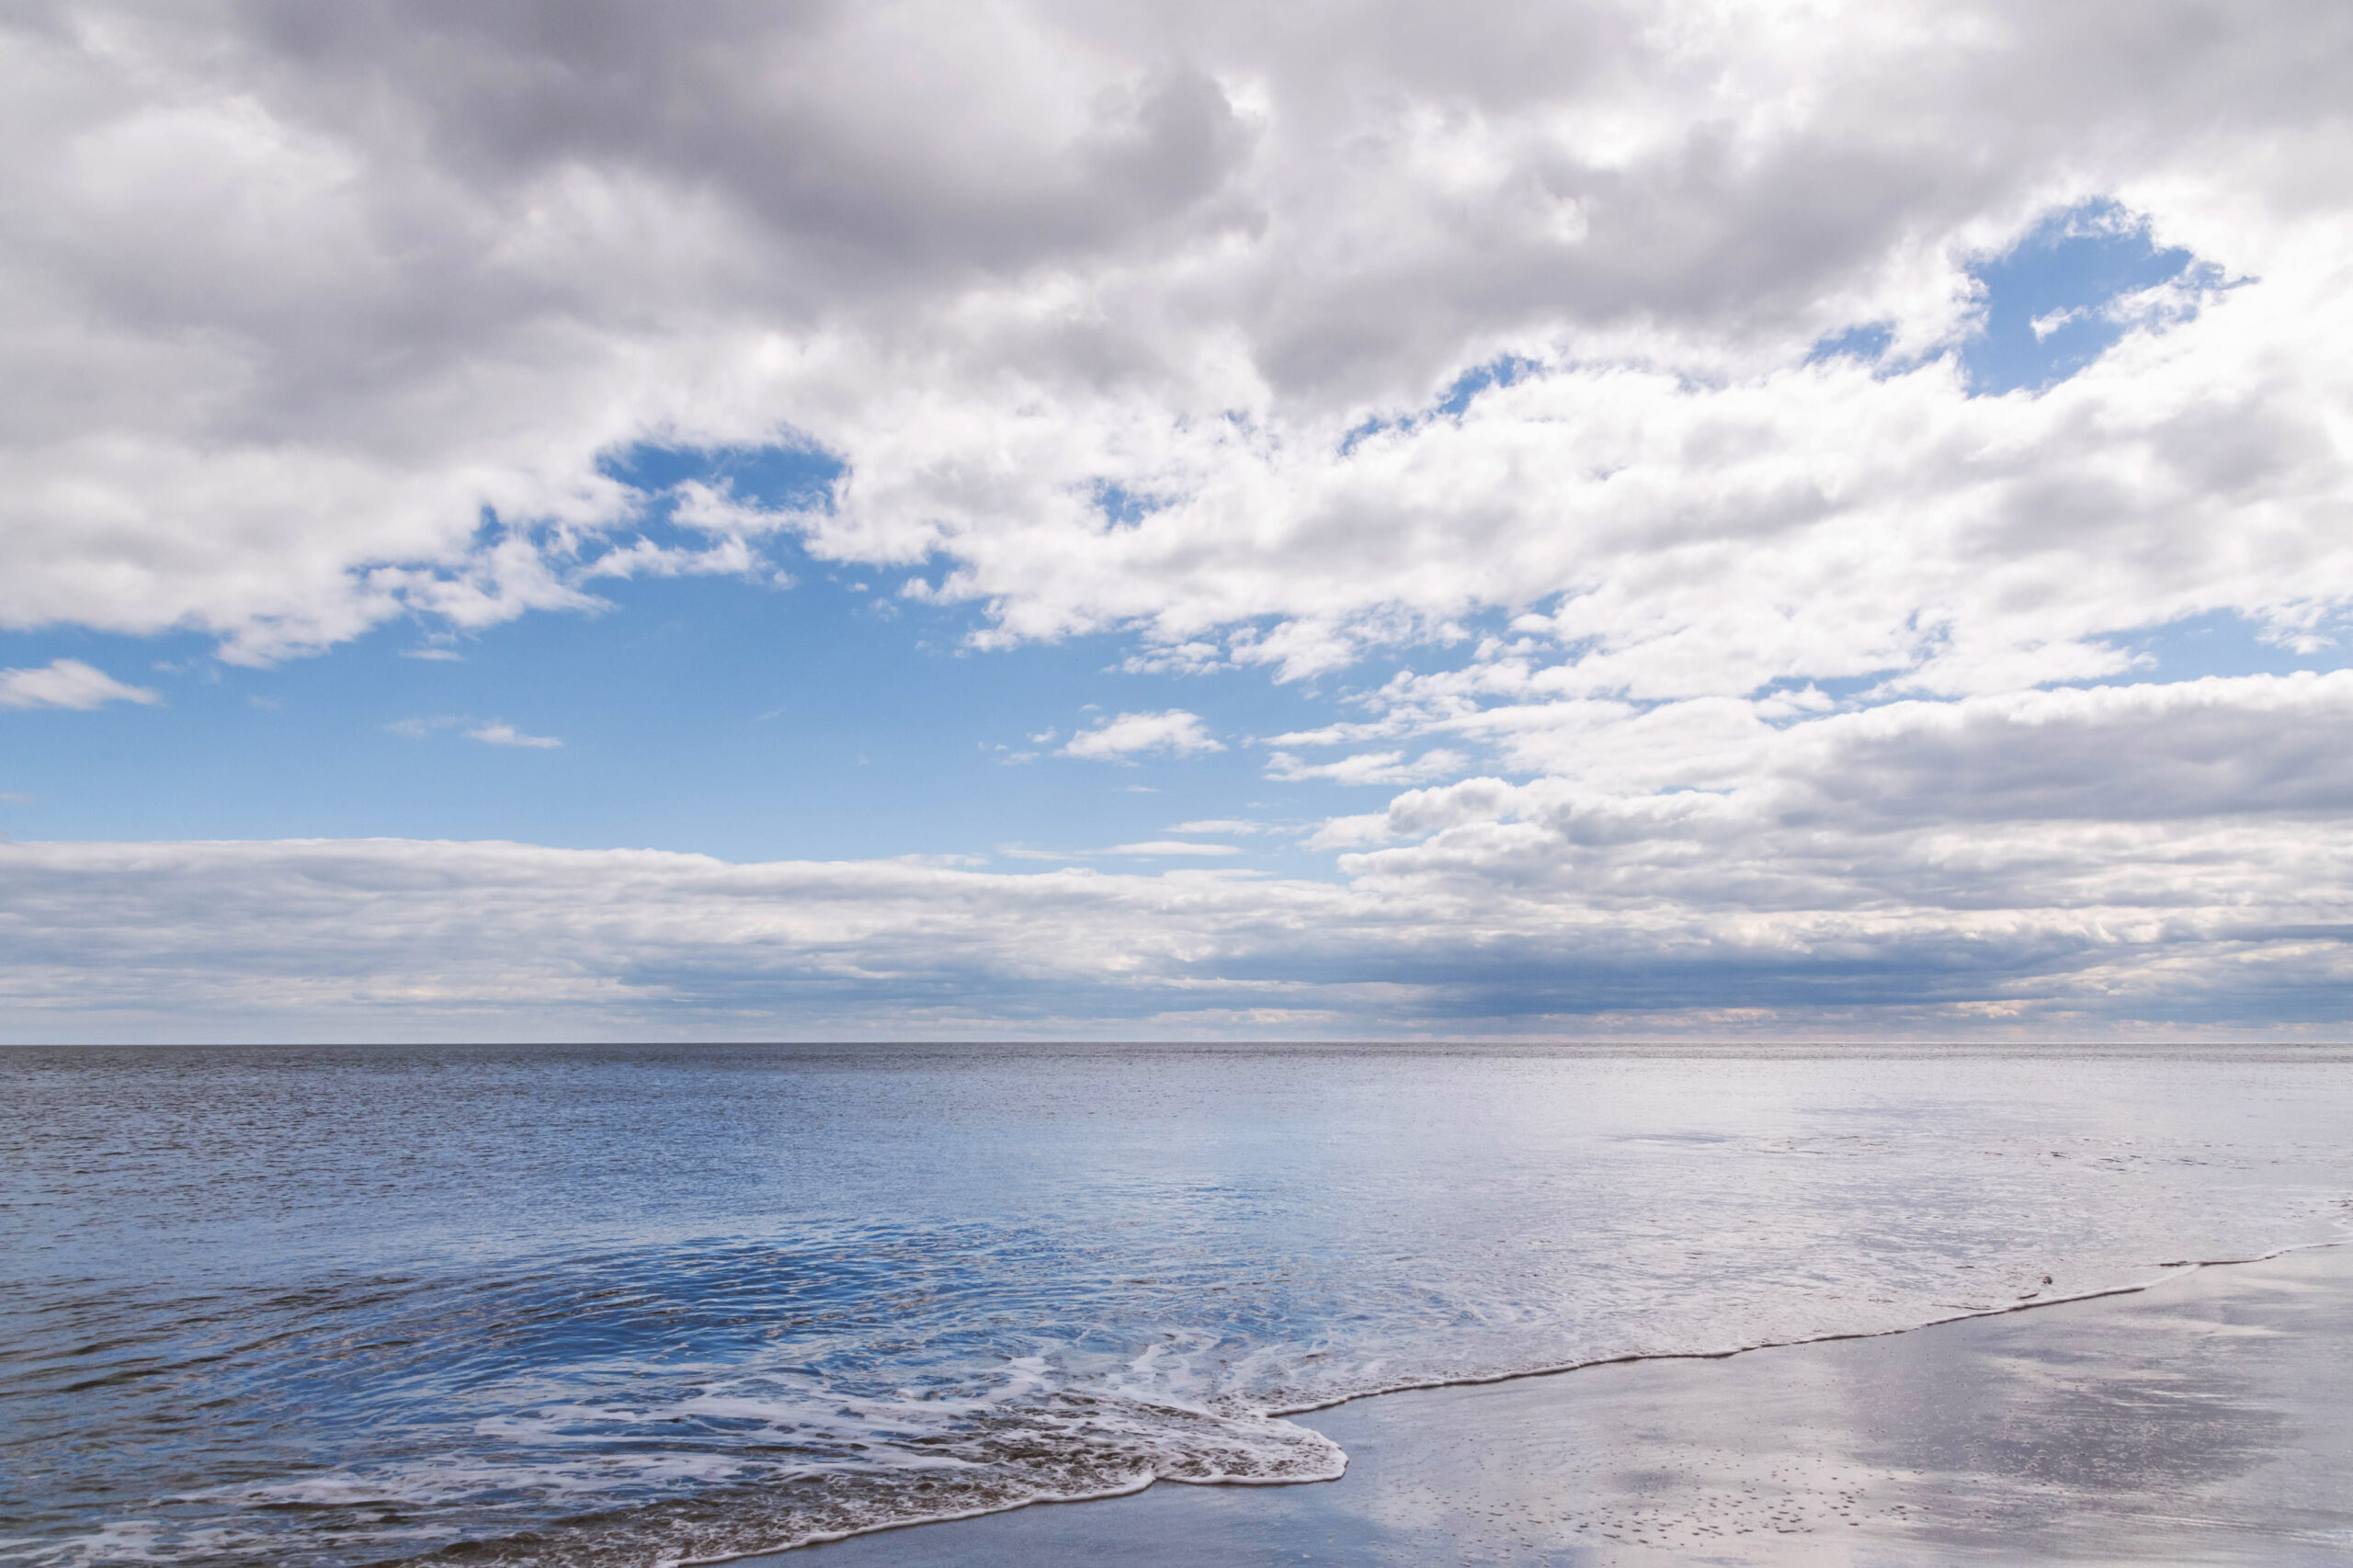 Puffy white and blue clouds in a blue sky reflected in a glassy flat ocean